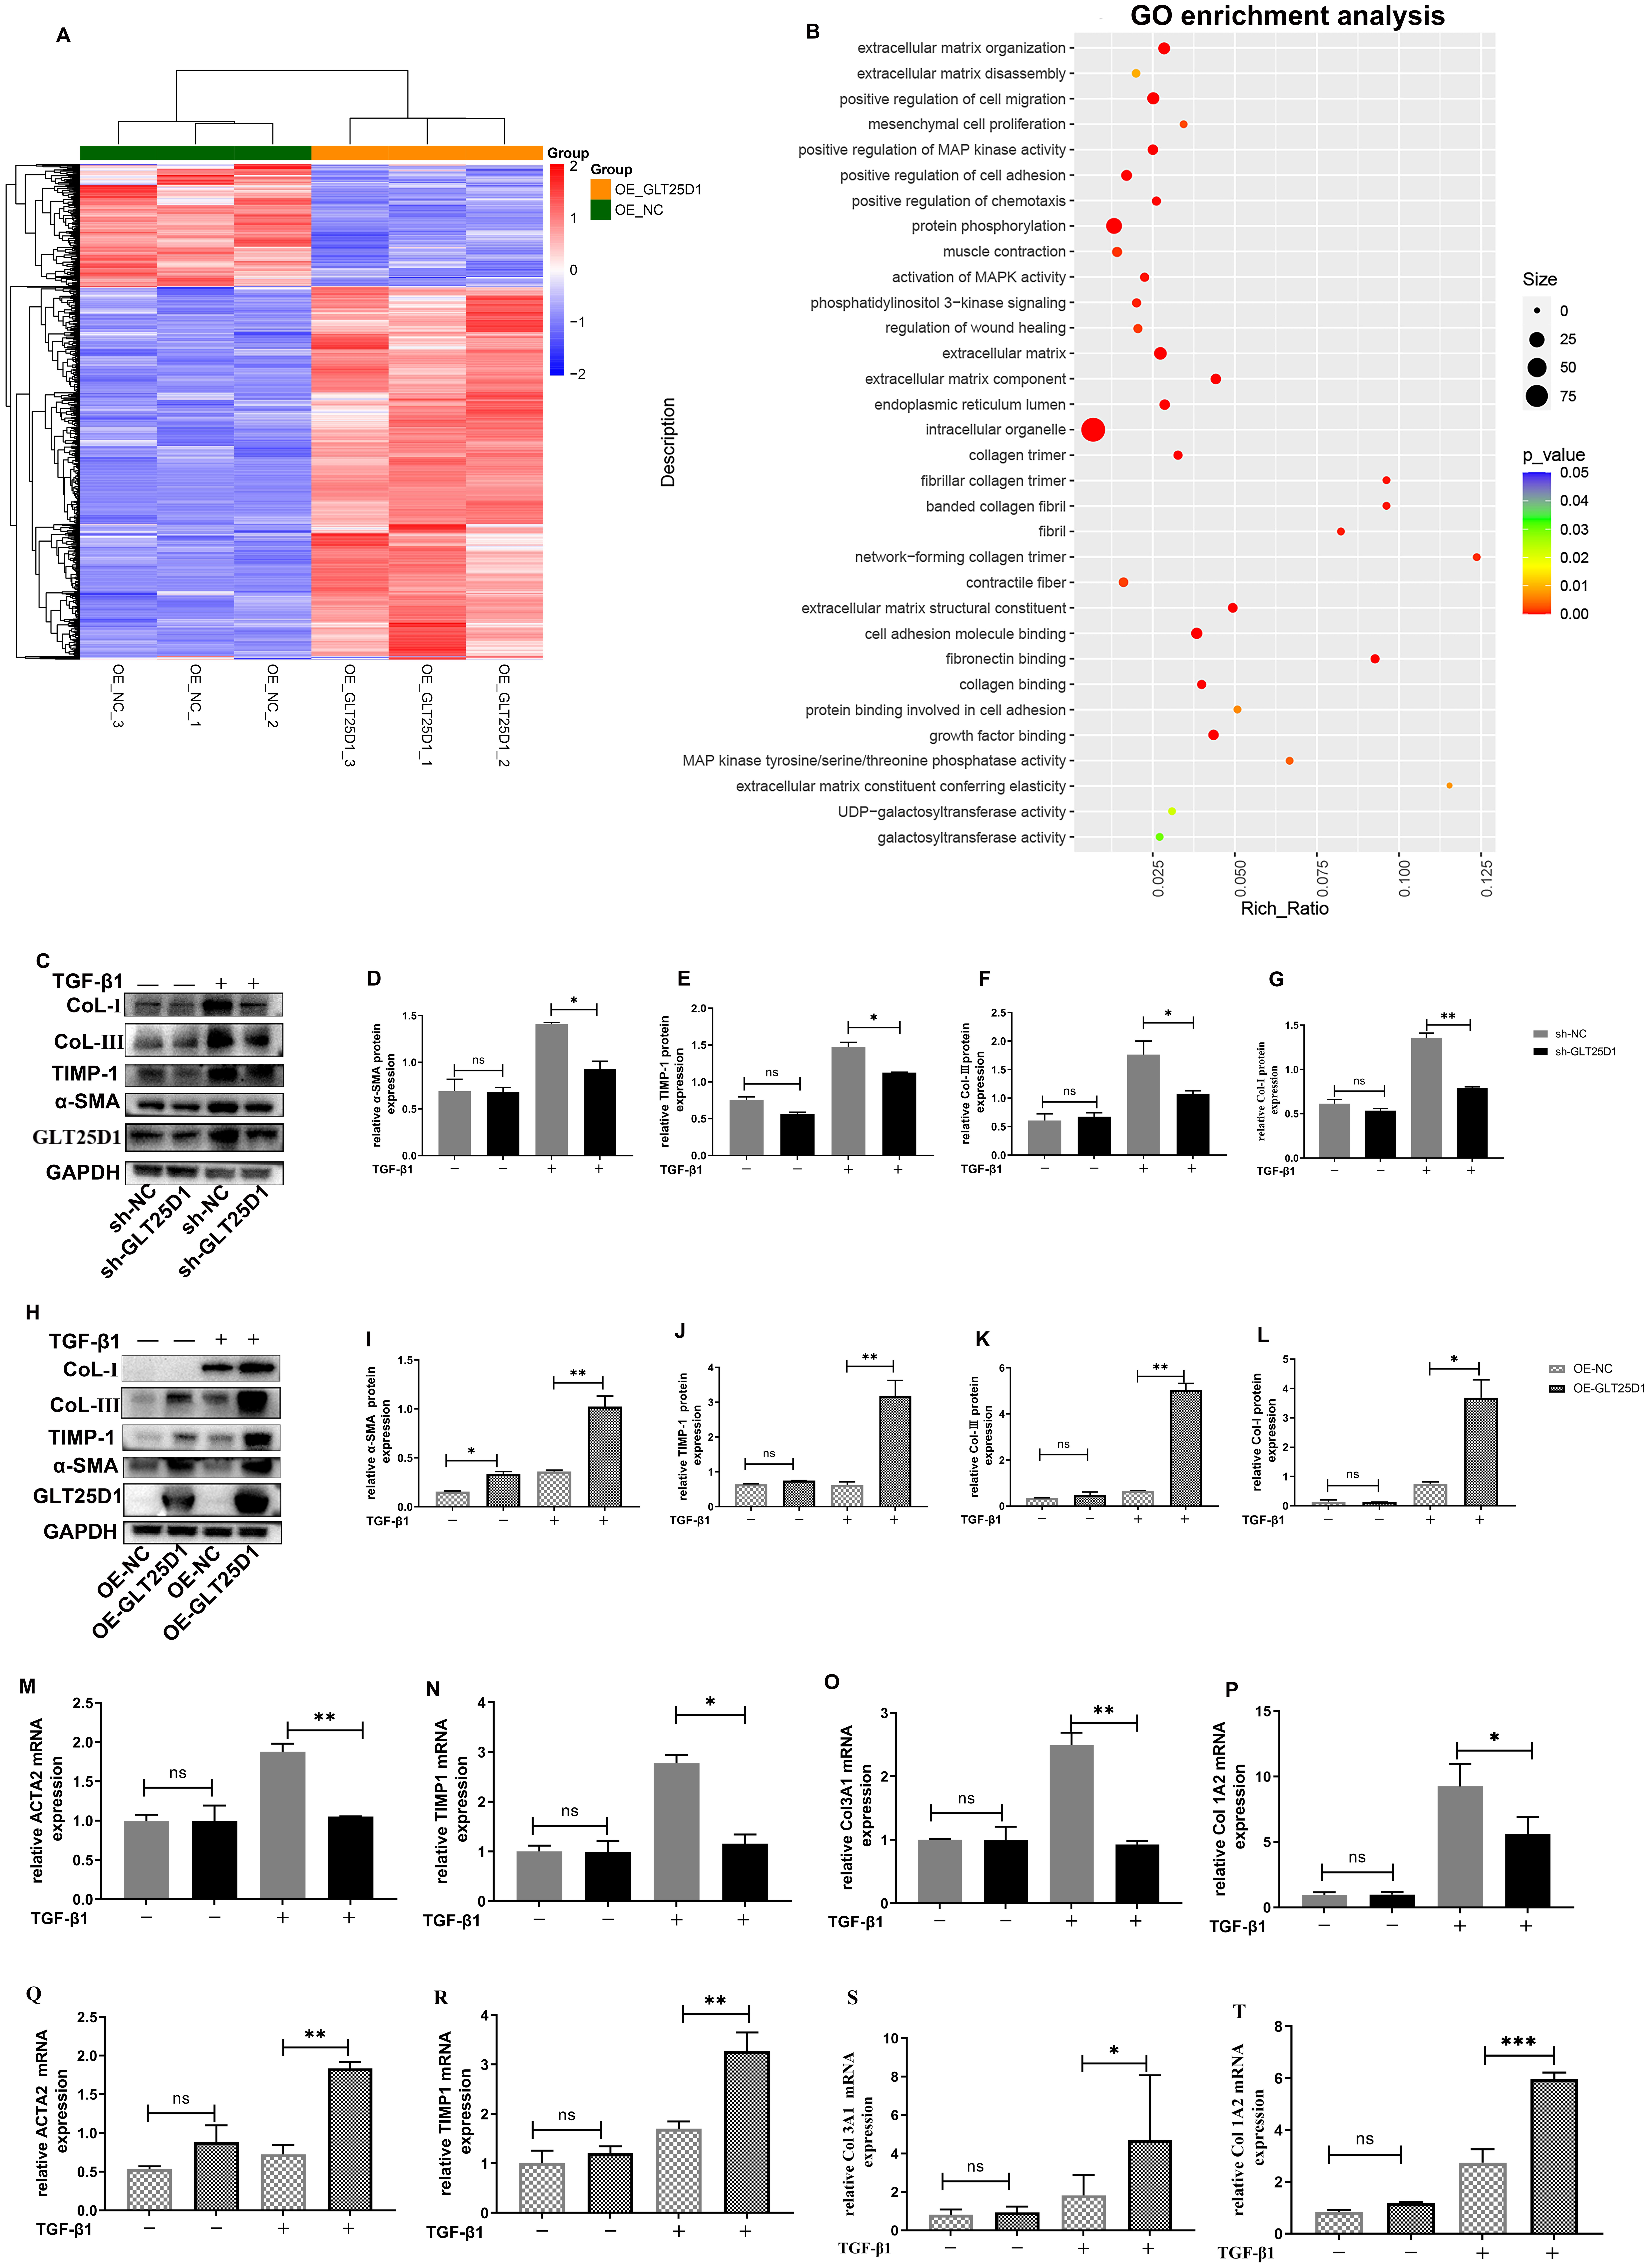 GLT25D1 regulates TGF-β1-induced HSC activation and ECM production by LX-2 cells.